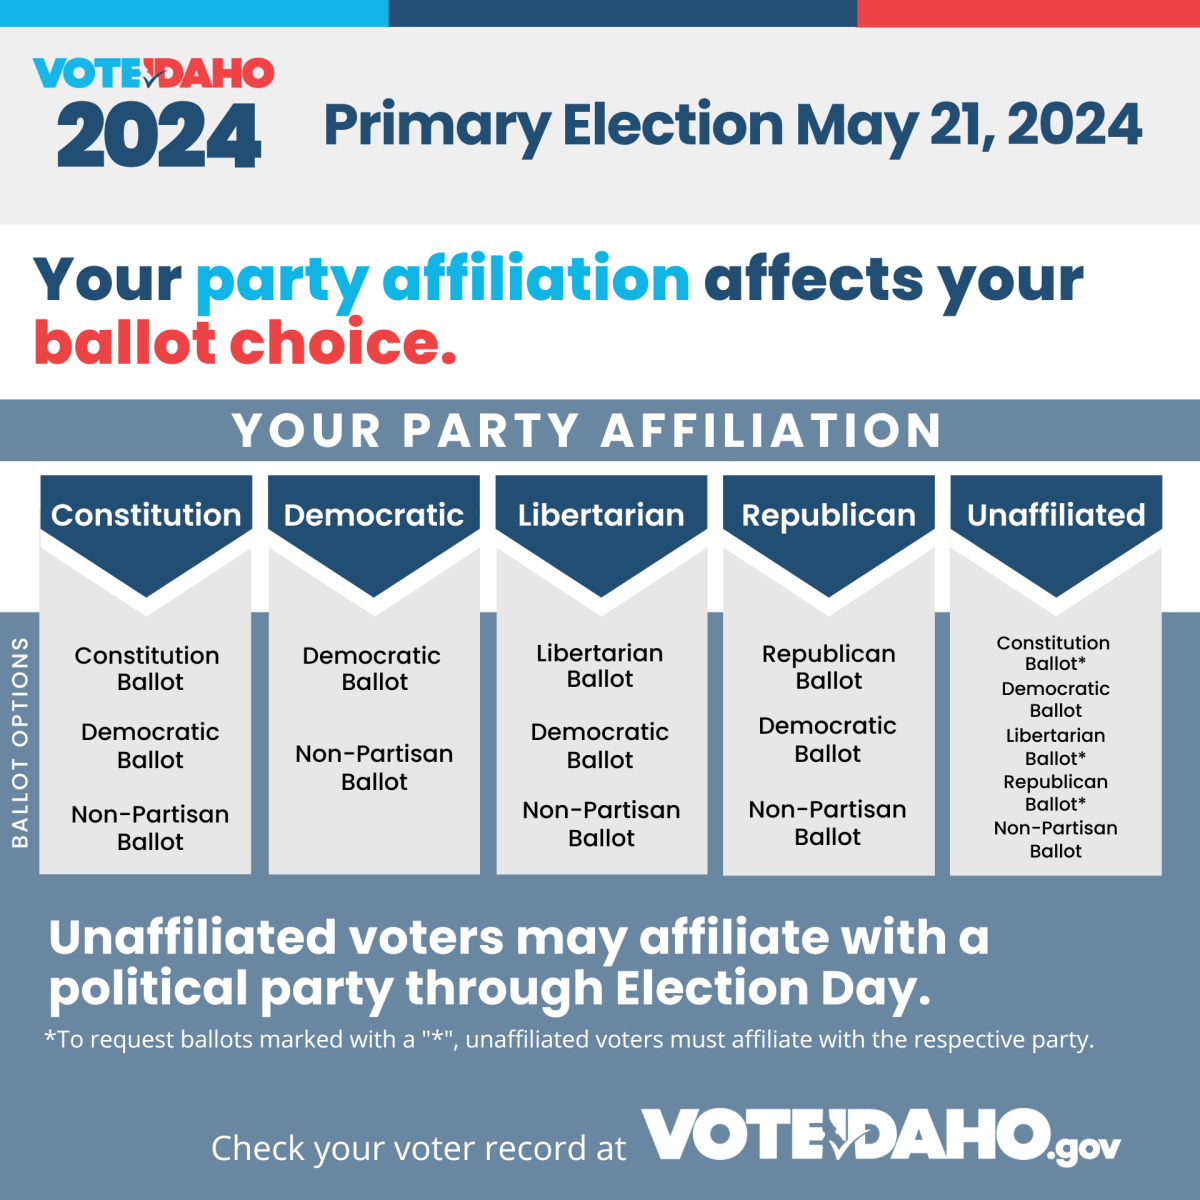 Party affiliations affects your ballot choice